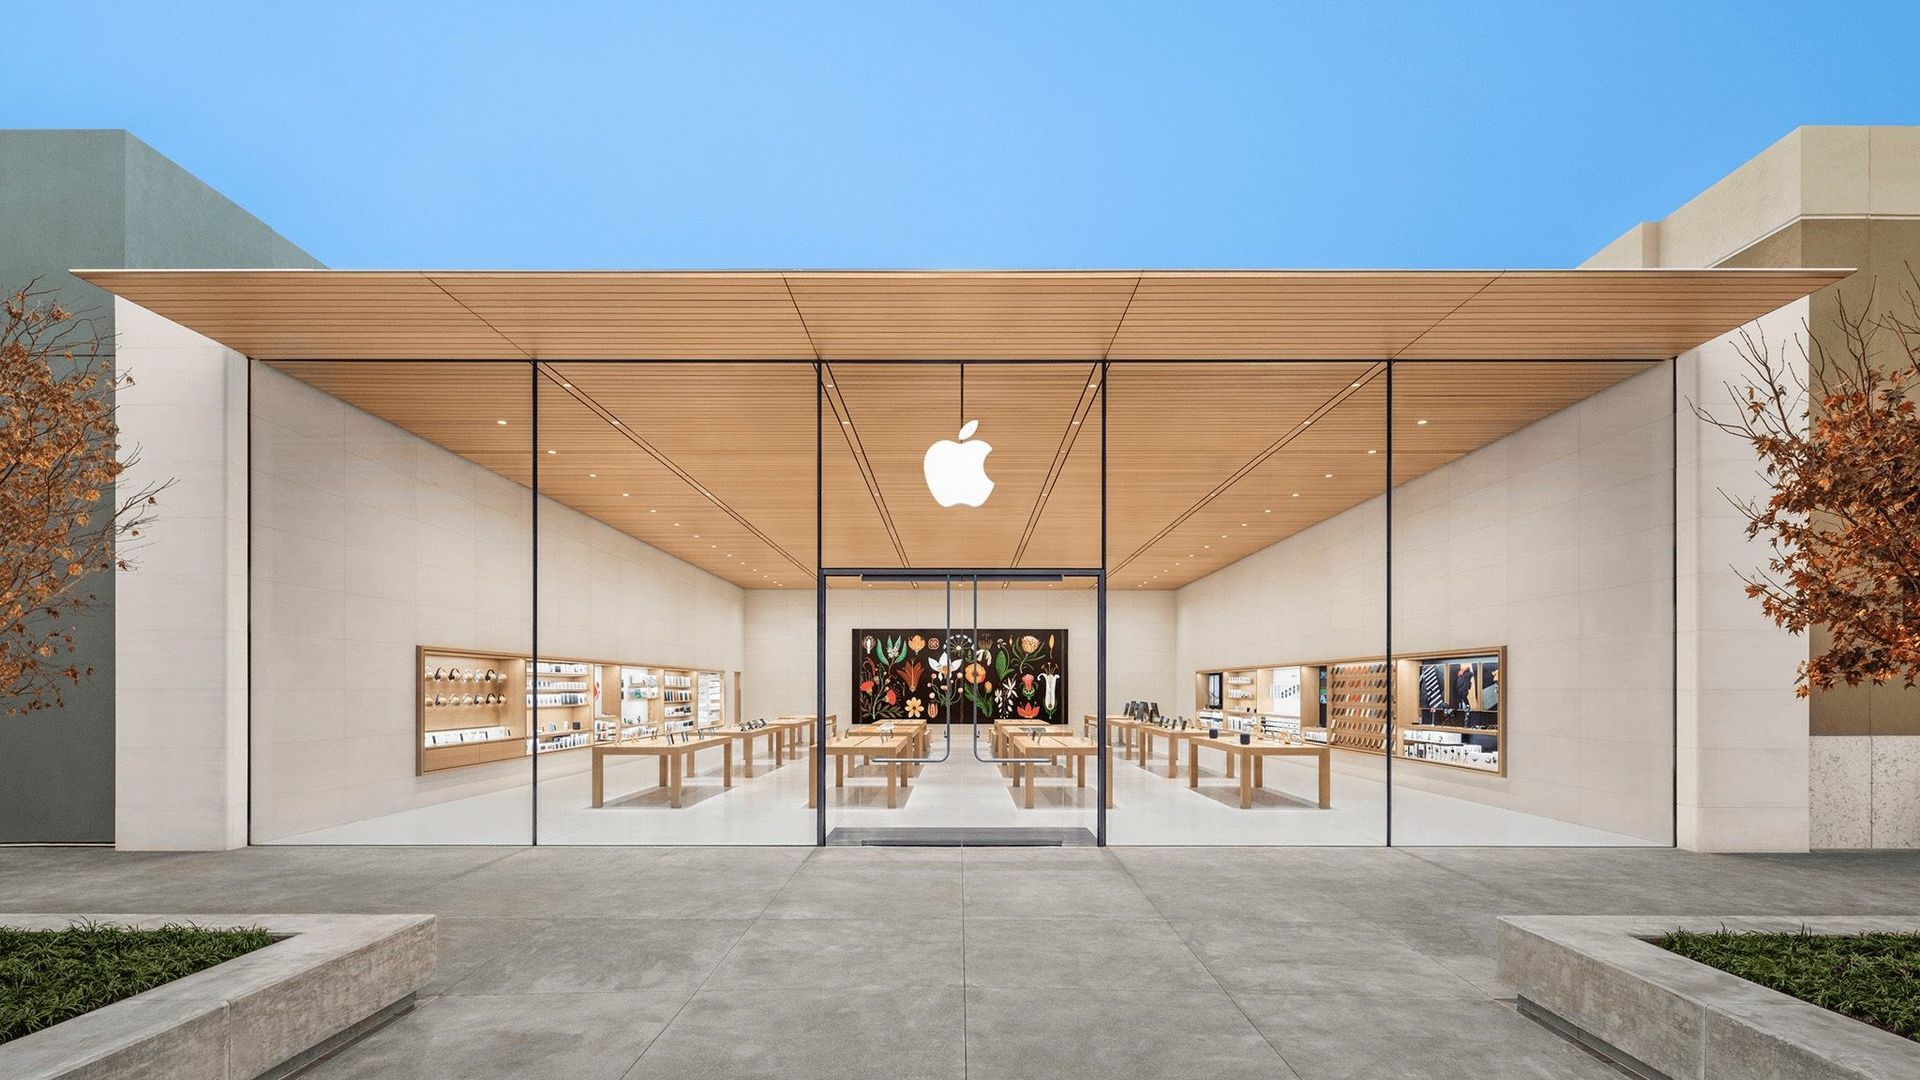 Apple layoffs: A shift in priorities for the tech giant